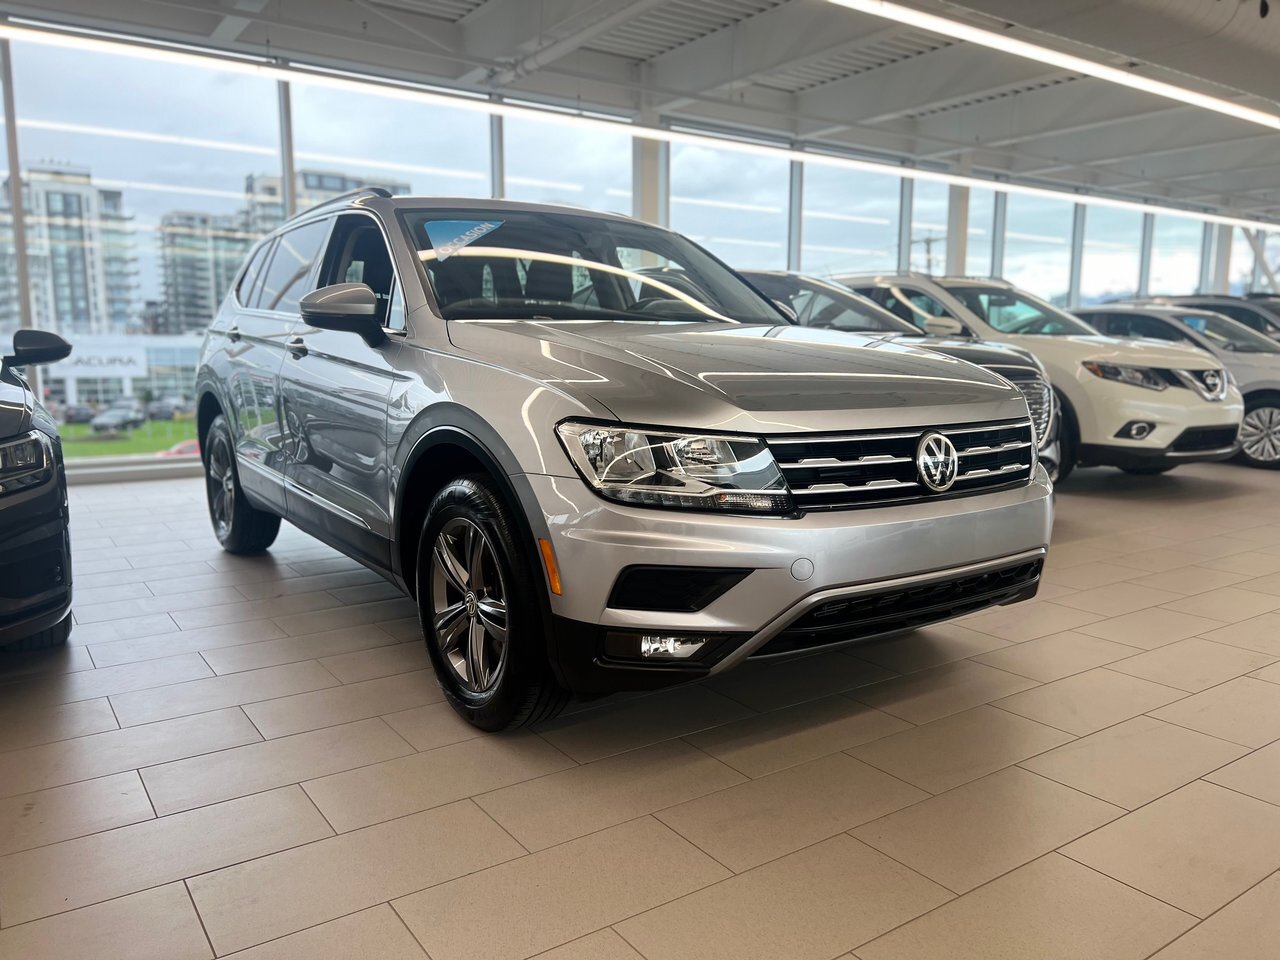 2019 Volkswagen Tiguan Comfortline Awd - pano roof and leather / Awd - to